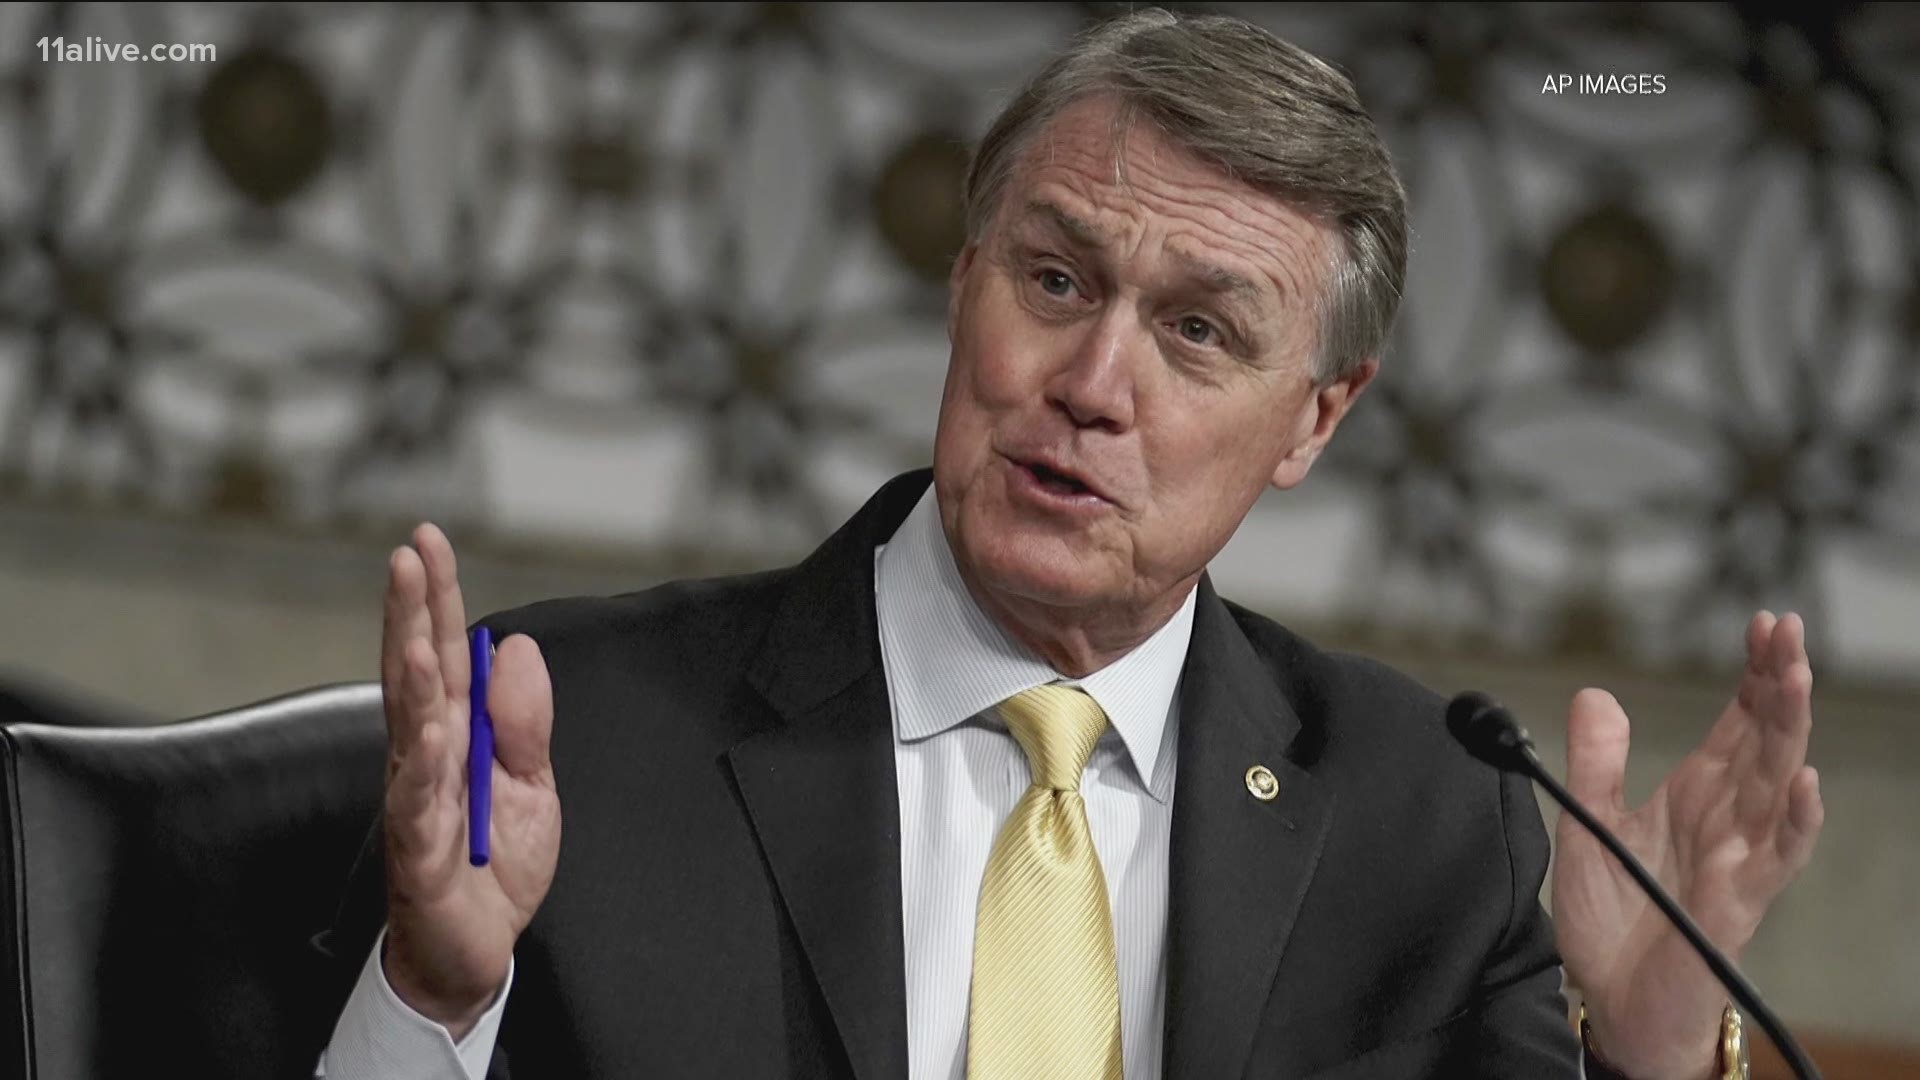 US Sen. David Perdue (R-Ga.) bought and sold stock in at least one medical device company whose price jumped even as Congress was trying to manage the opioid crisis.